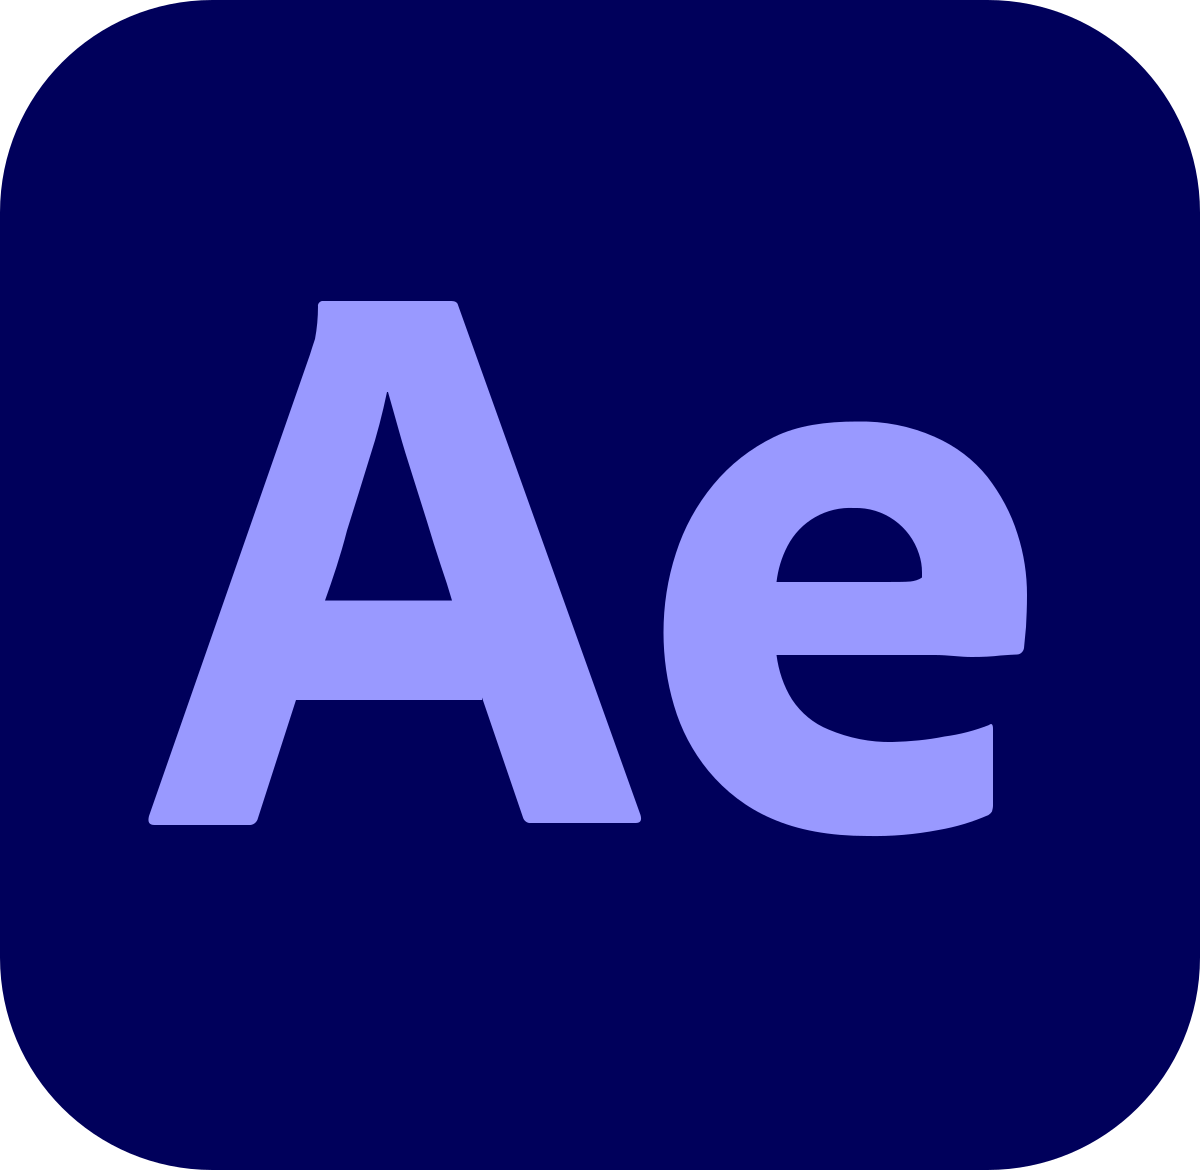 Adobe After Effects 2021 (v18.2.1) Multilingual | RePack by m0nkrus